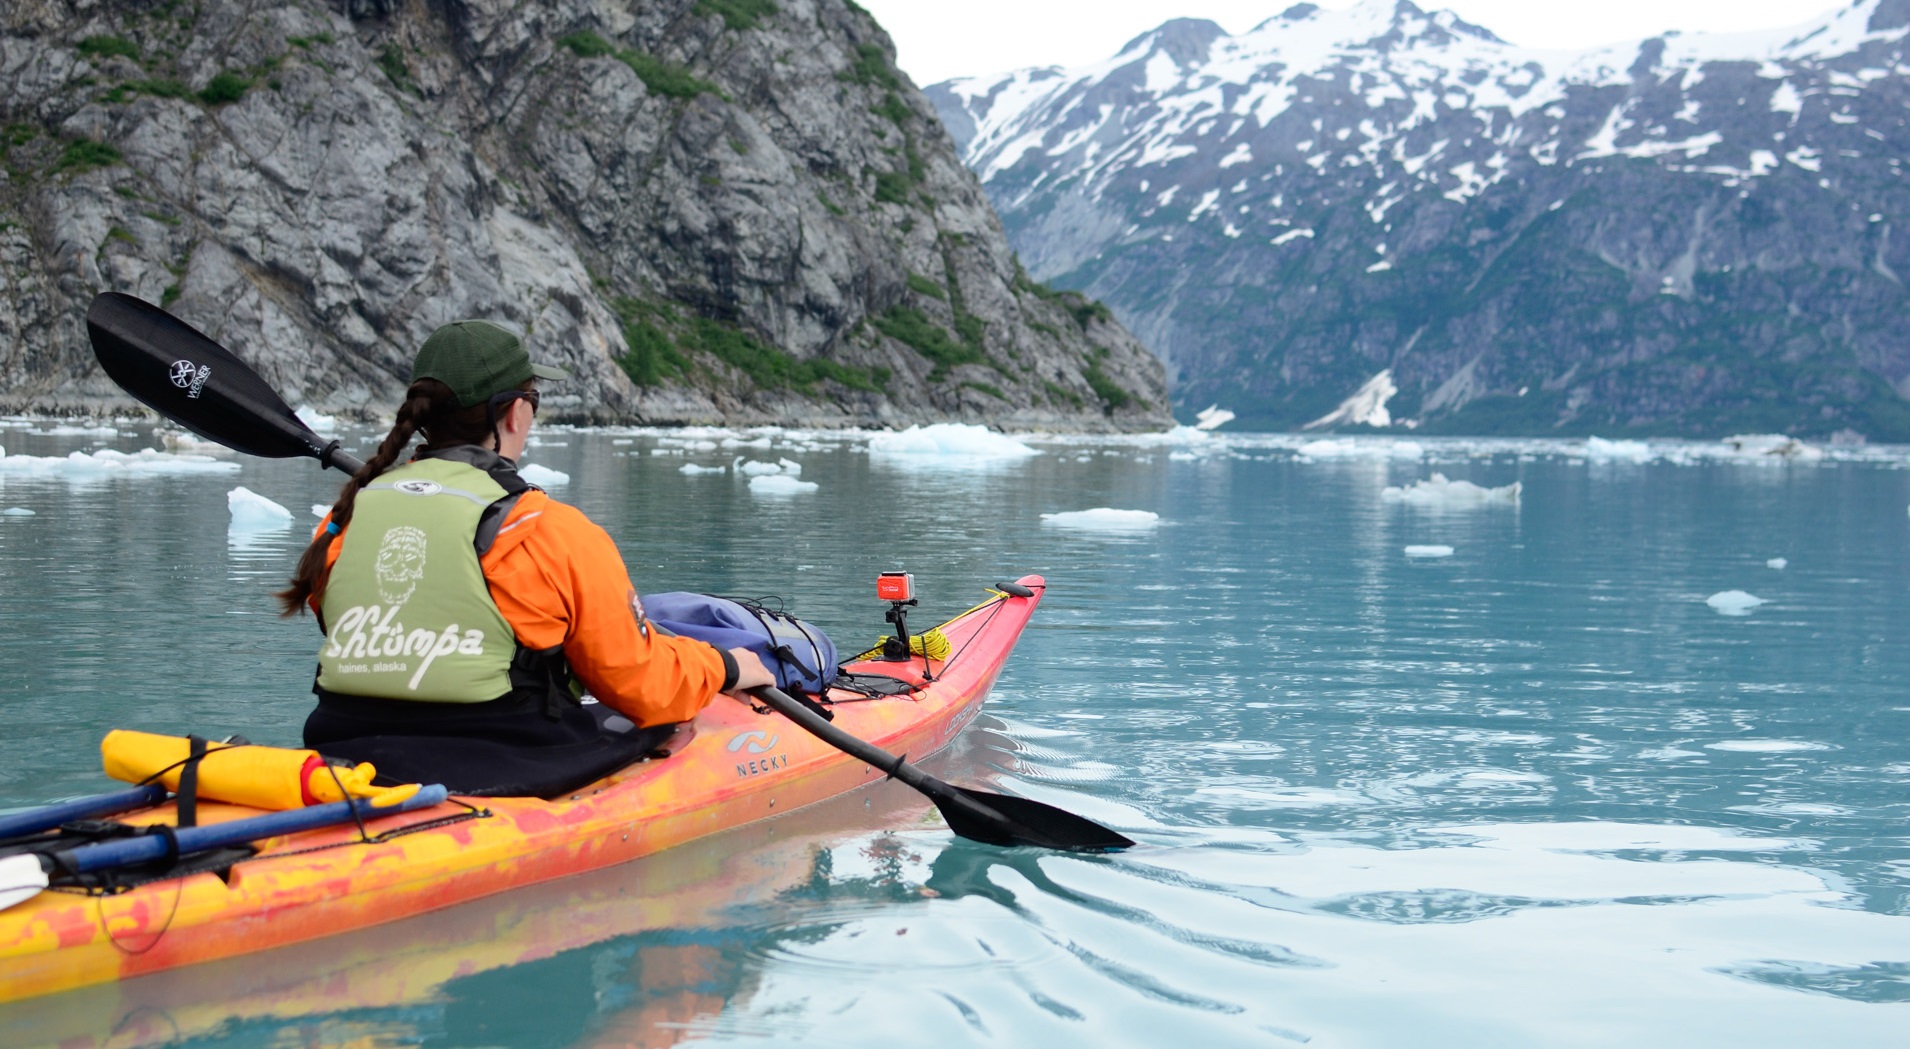 Kayaking in a national park